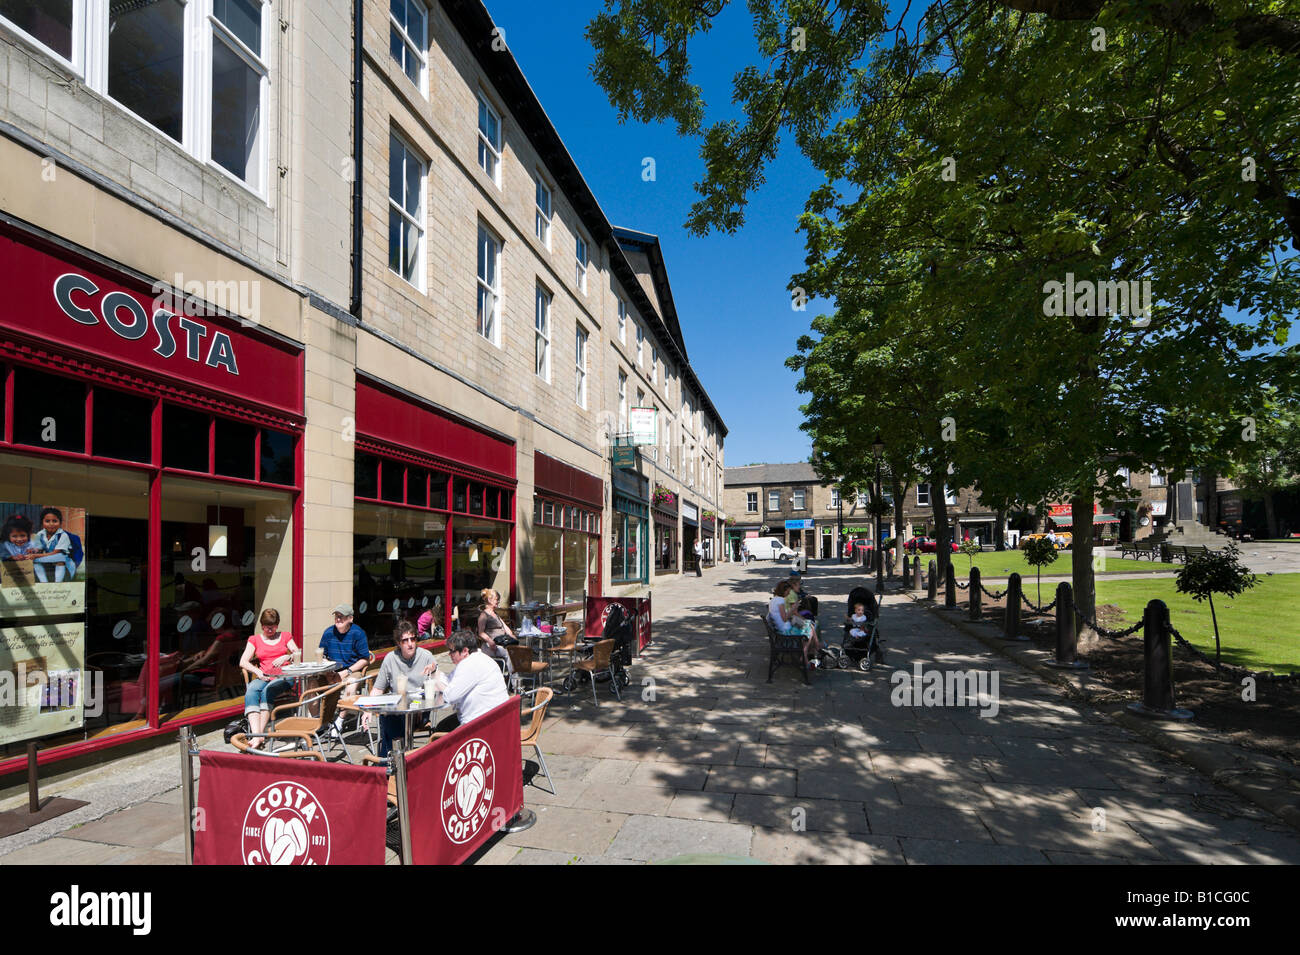 Costa Coffee Cafe in the town centre, Norfolk Square, Glossop, Peak District, Derbyshire, England, United Kingdom Stock Photo